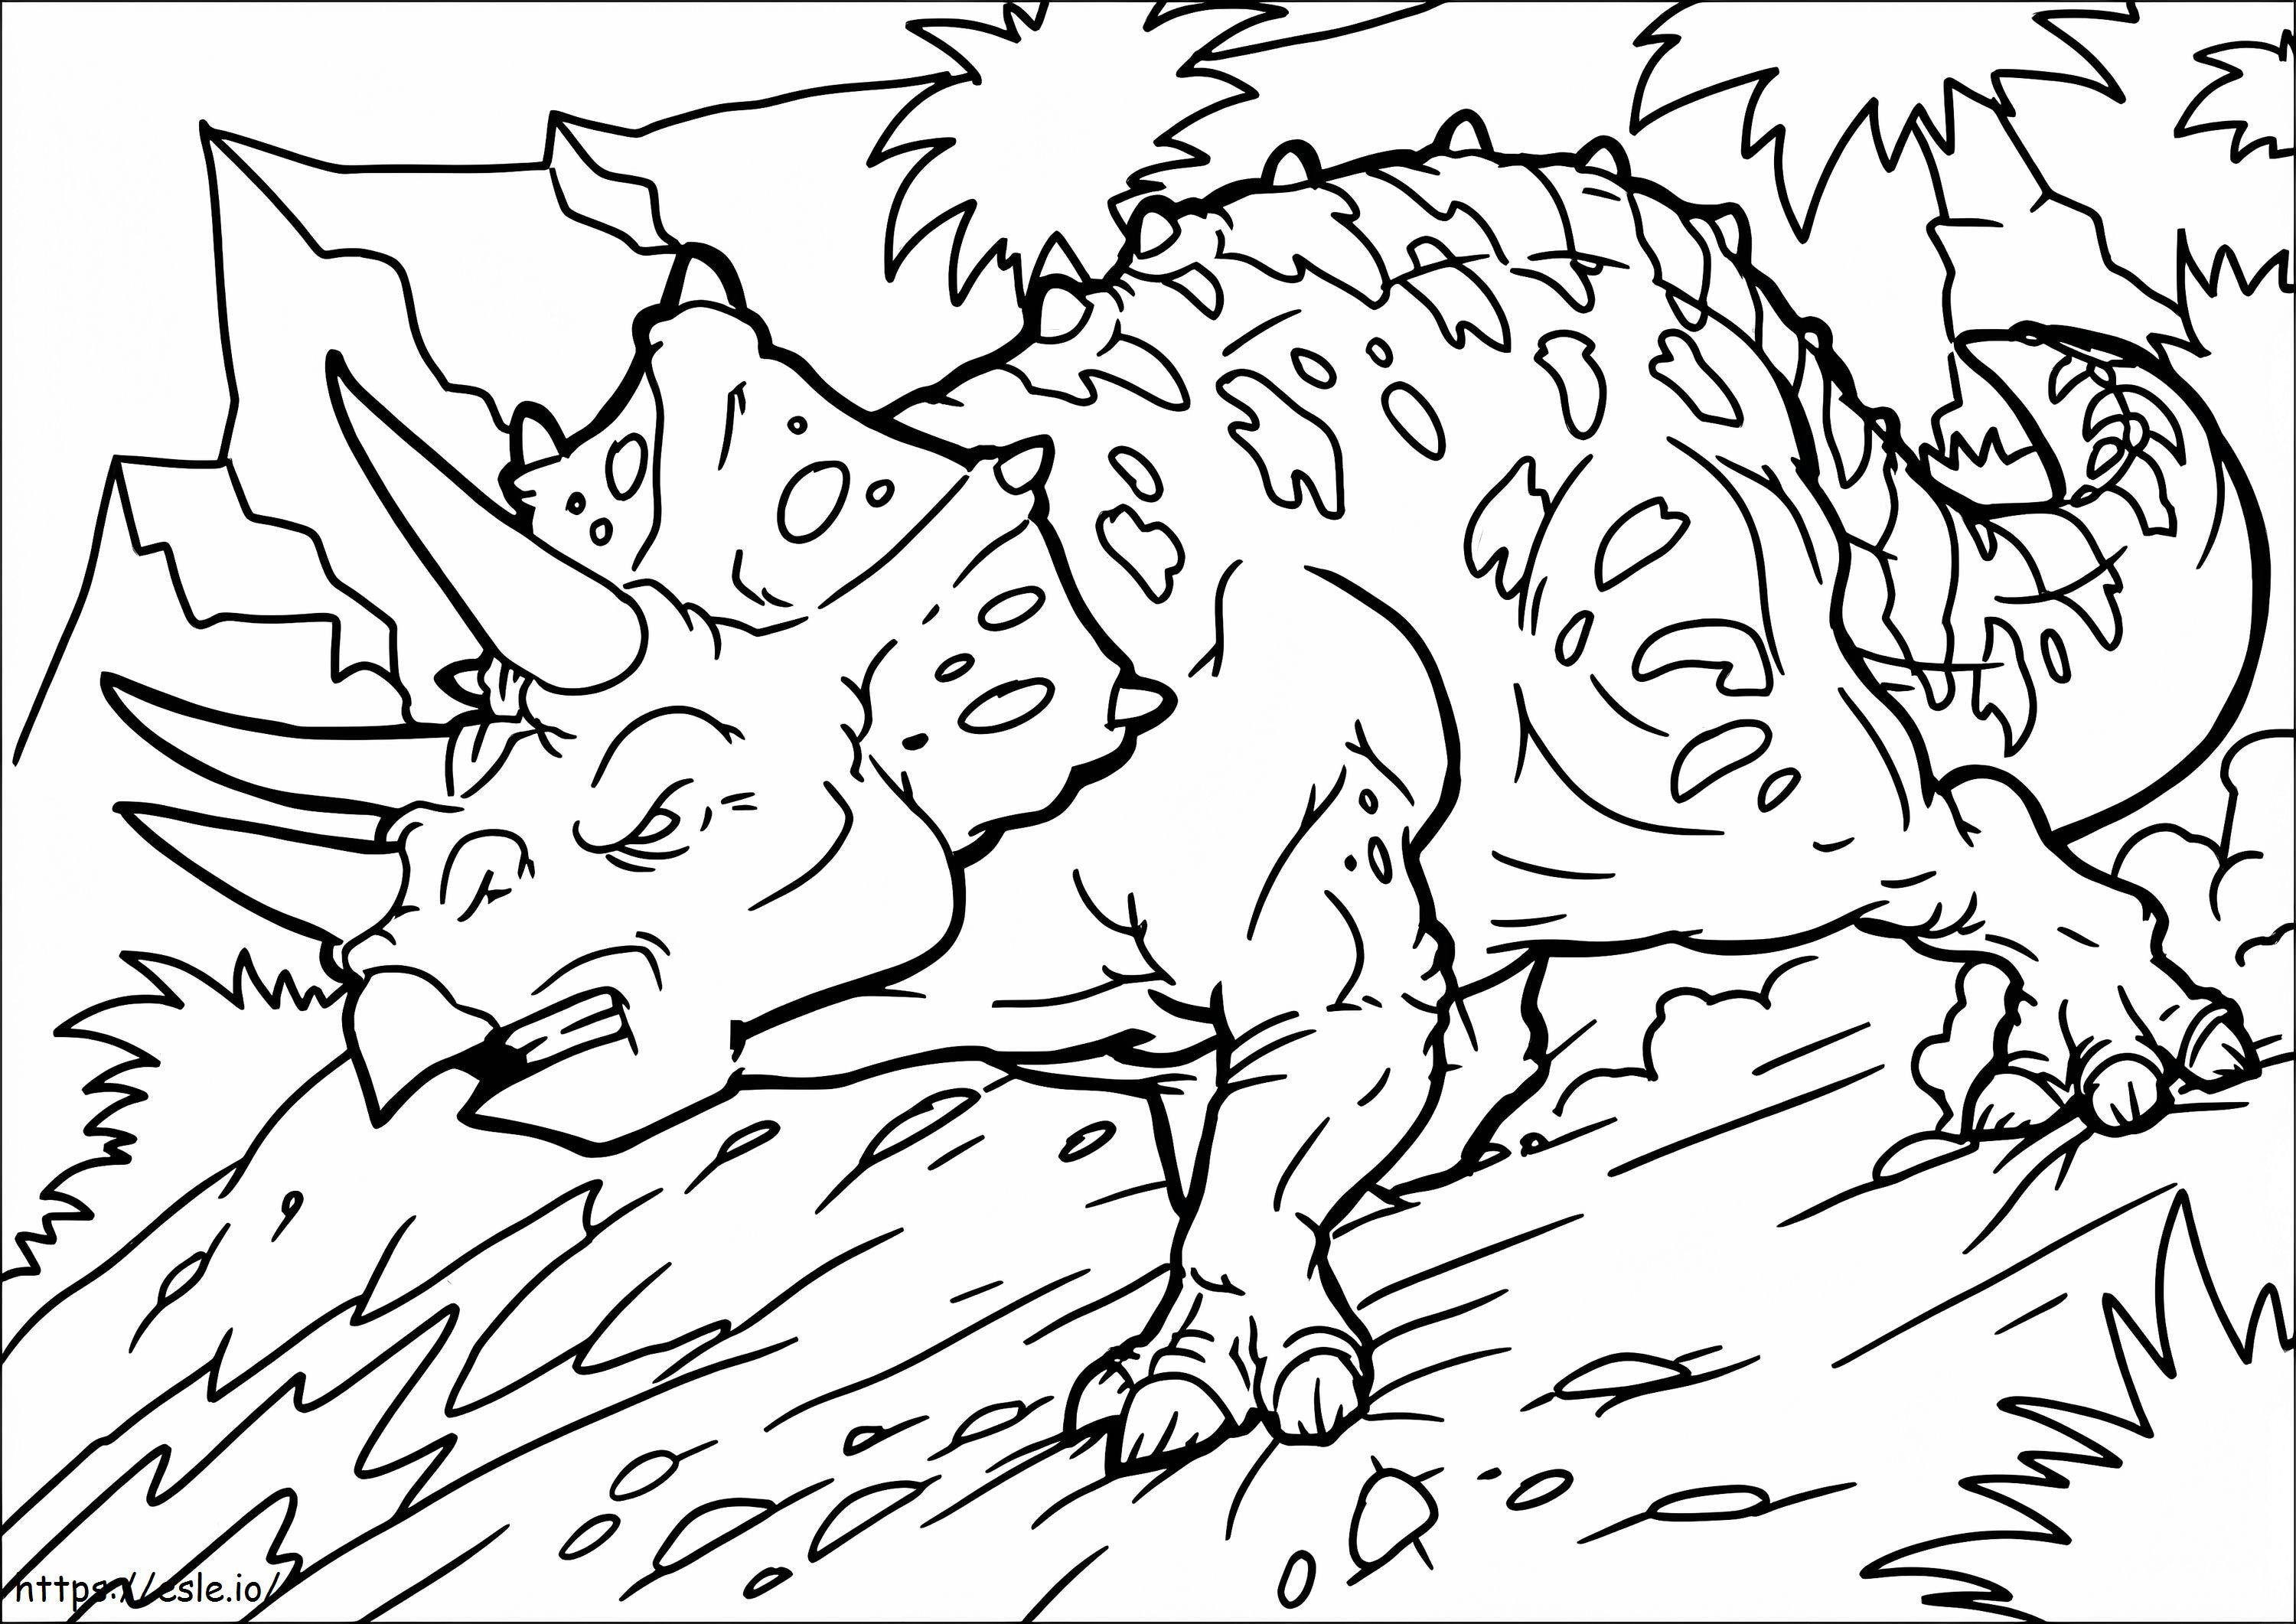 Angry Triceratops Running coloring page